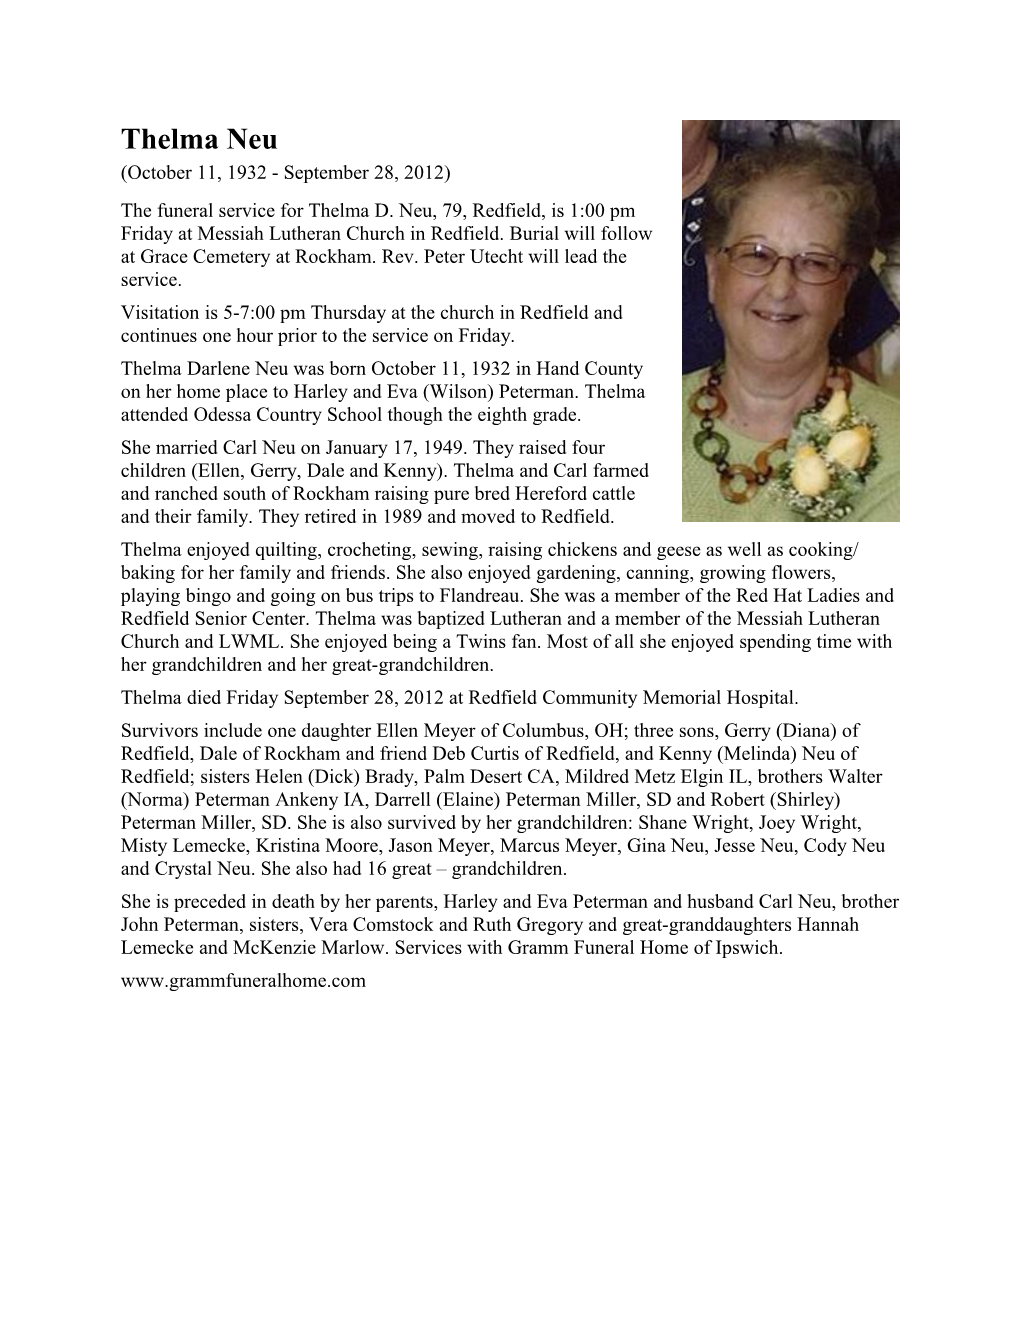 The Funeral Service for Thelma D. Neu, 79, Redfield, Is 1:00 Pm Friday at Messiah Lutheran